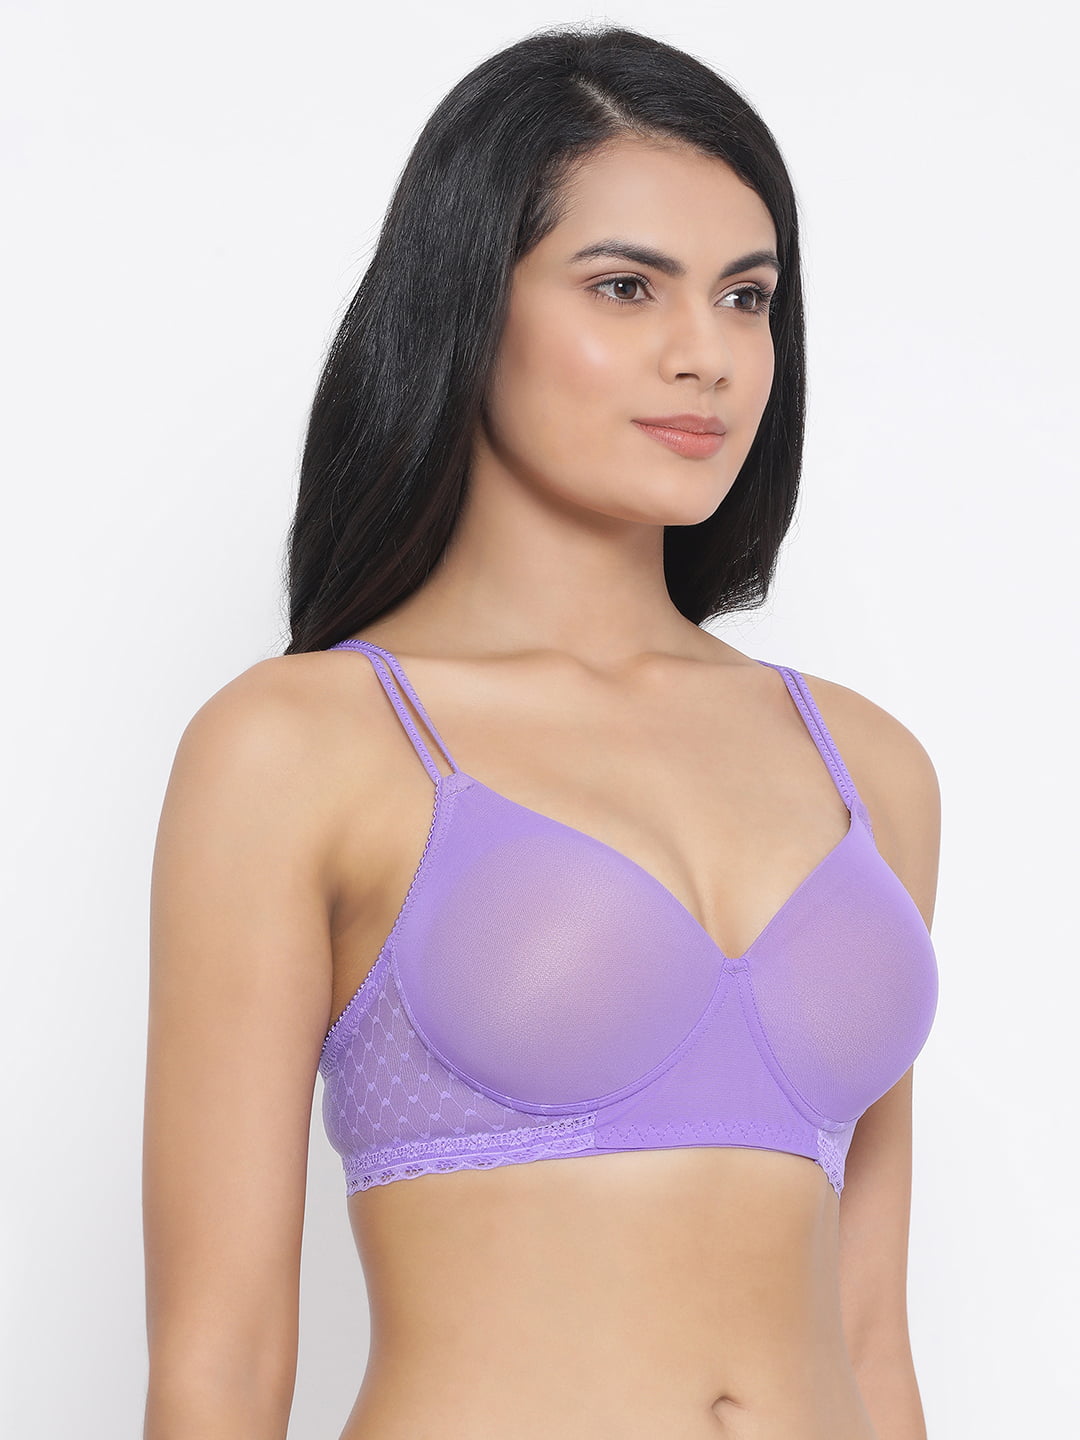 Clovia Padded Non-Wired Full Coverage T-shirt Bra with Lace in Light Purple  